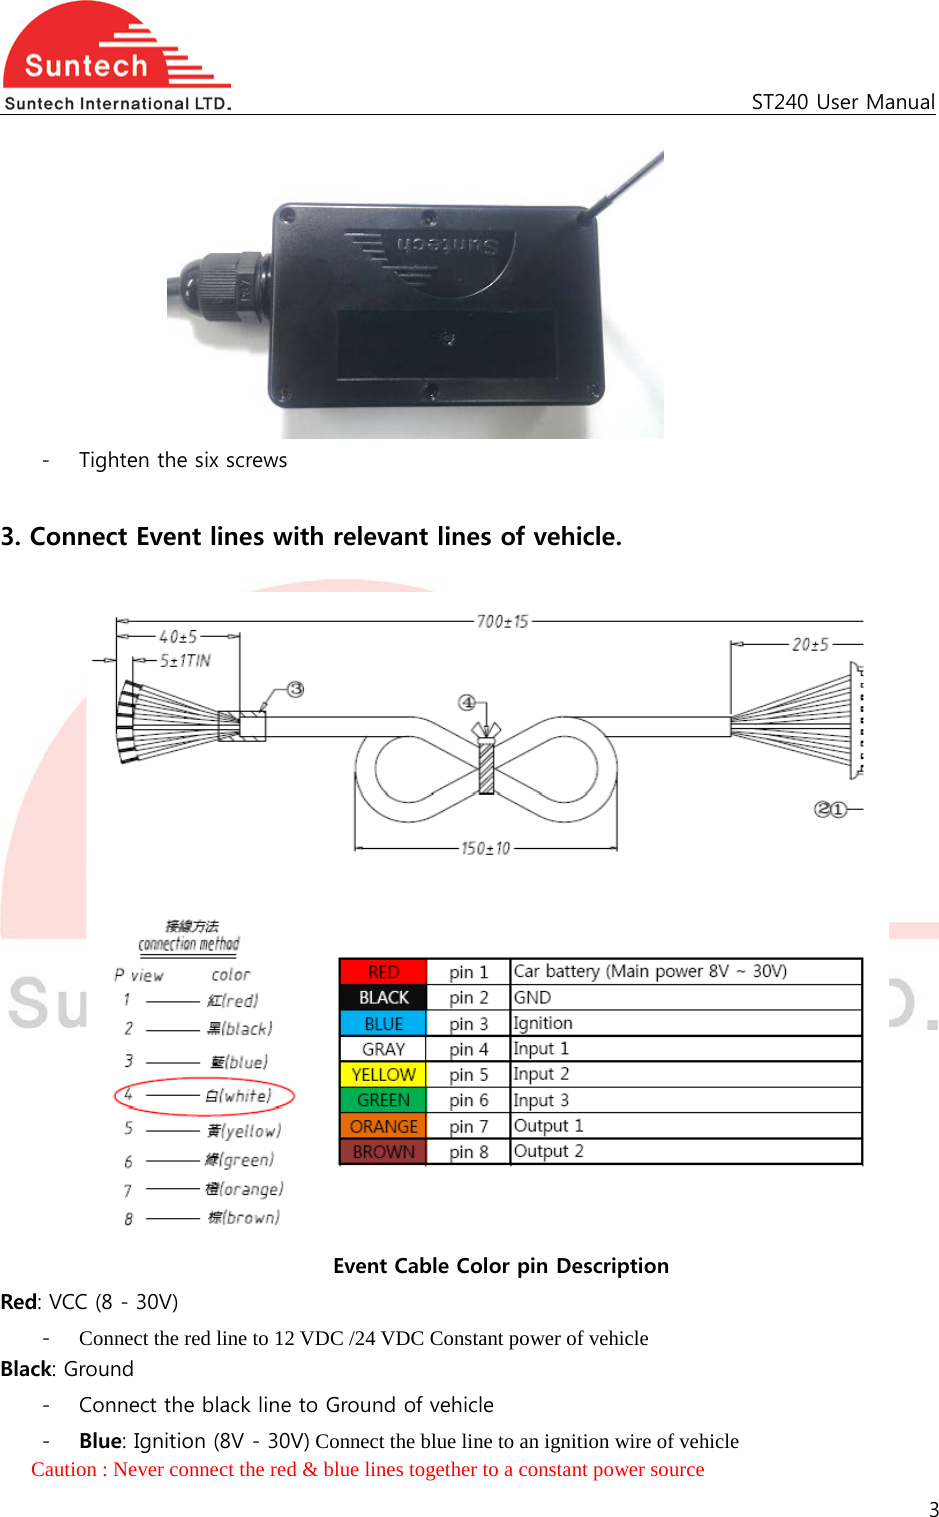                                                   ST240 User Manual  - Tighten the six screws  3. Connect Event lines with relevant lines of vehicle.     Event Cable Color pin Description Red: VCC (8 - 30V) - Connect the red line to 12 VDC /24 VDC Constant power of vehicle Black: Ground - Connect the black line to Ground of vehicle - Blue: Ignition (8V - 30V) Connect the blue line to an ignition wire of vehicle Caution : Never connect the red &amp; blue lines together to a constant power source   3  